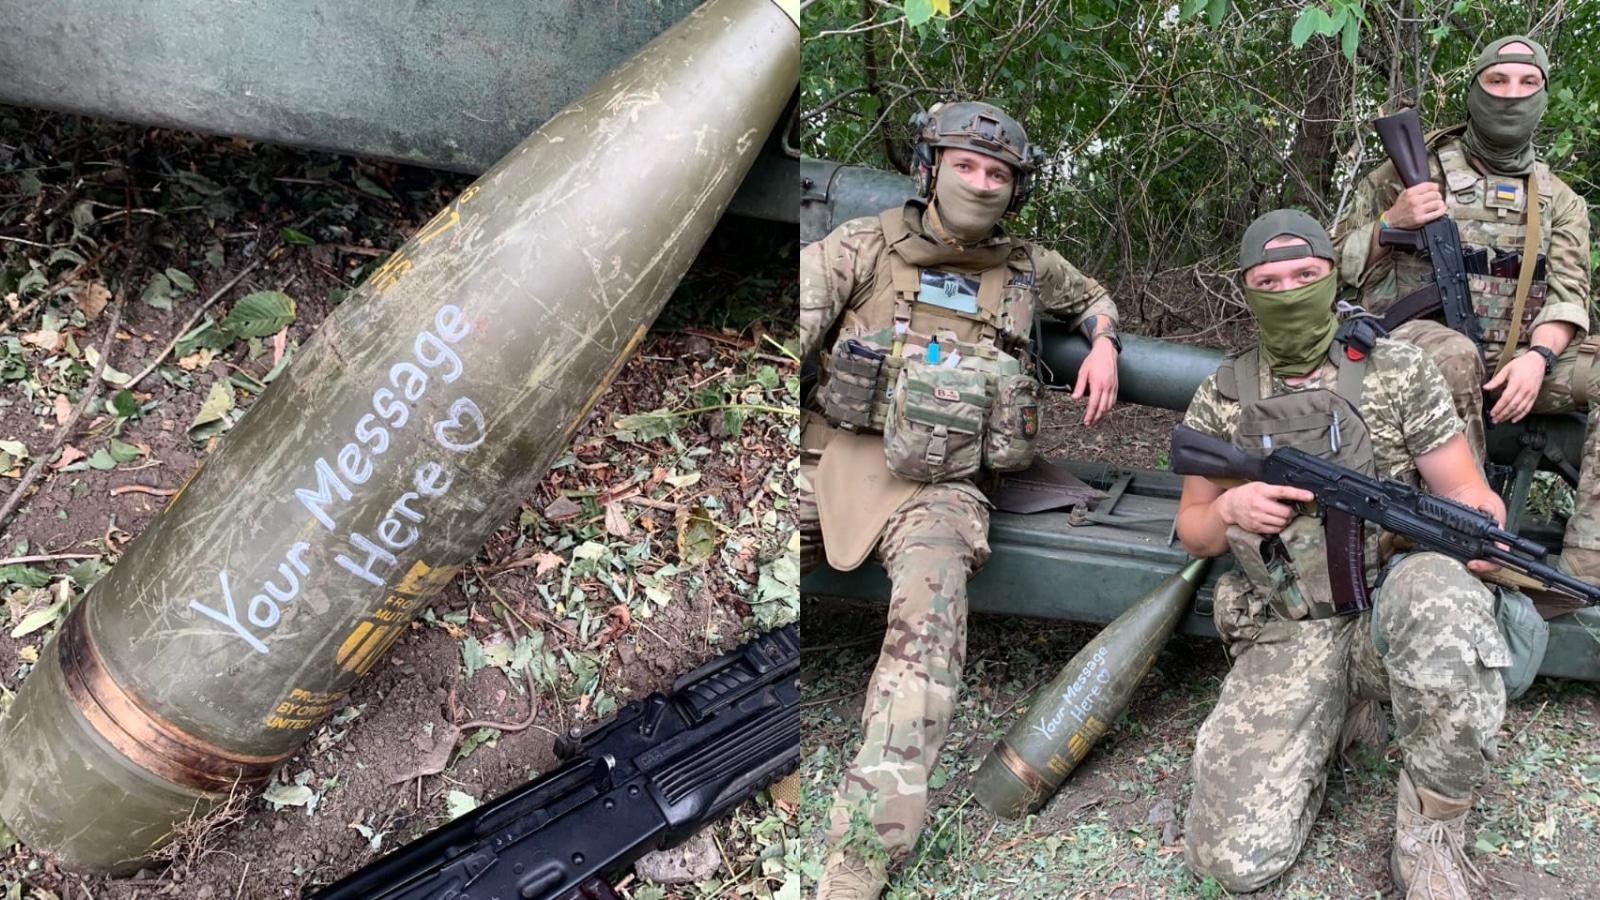 Frogwares offering messages on live ukraine rounds